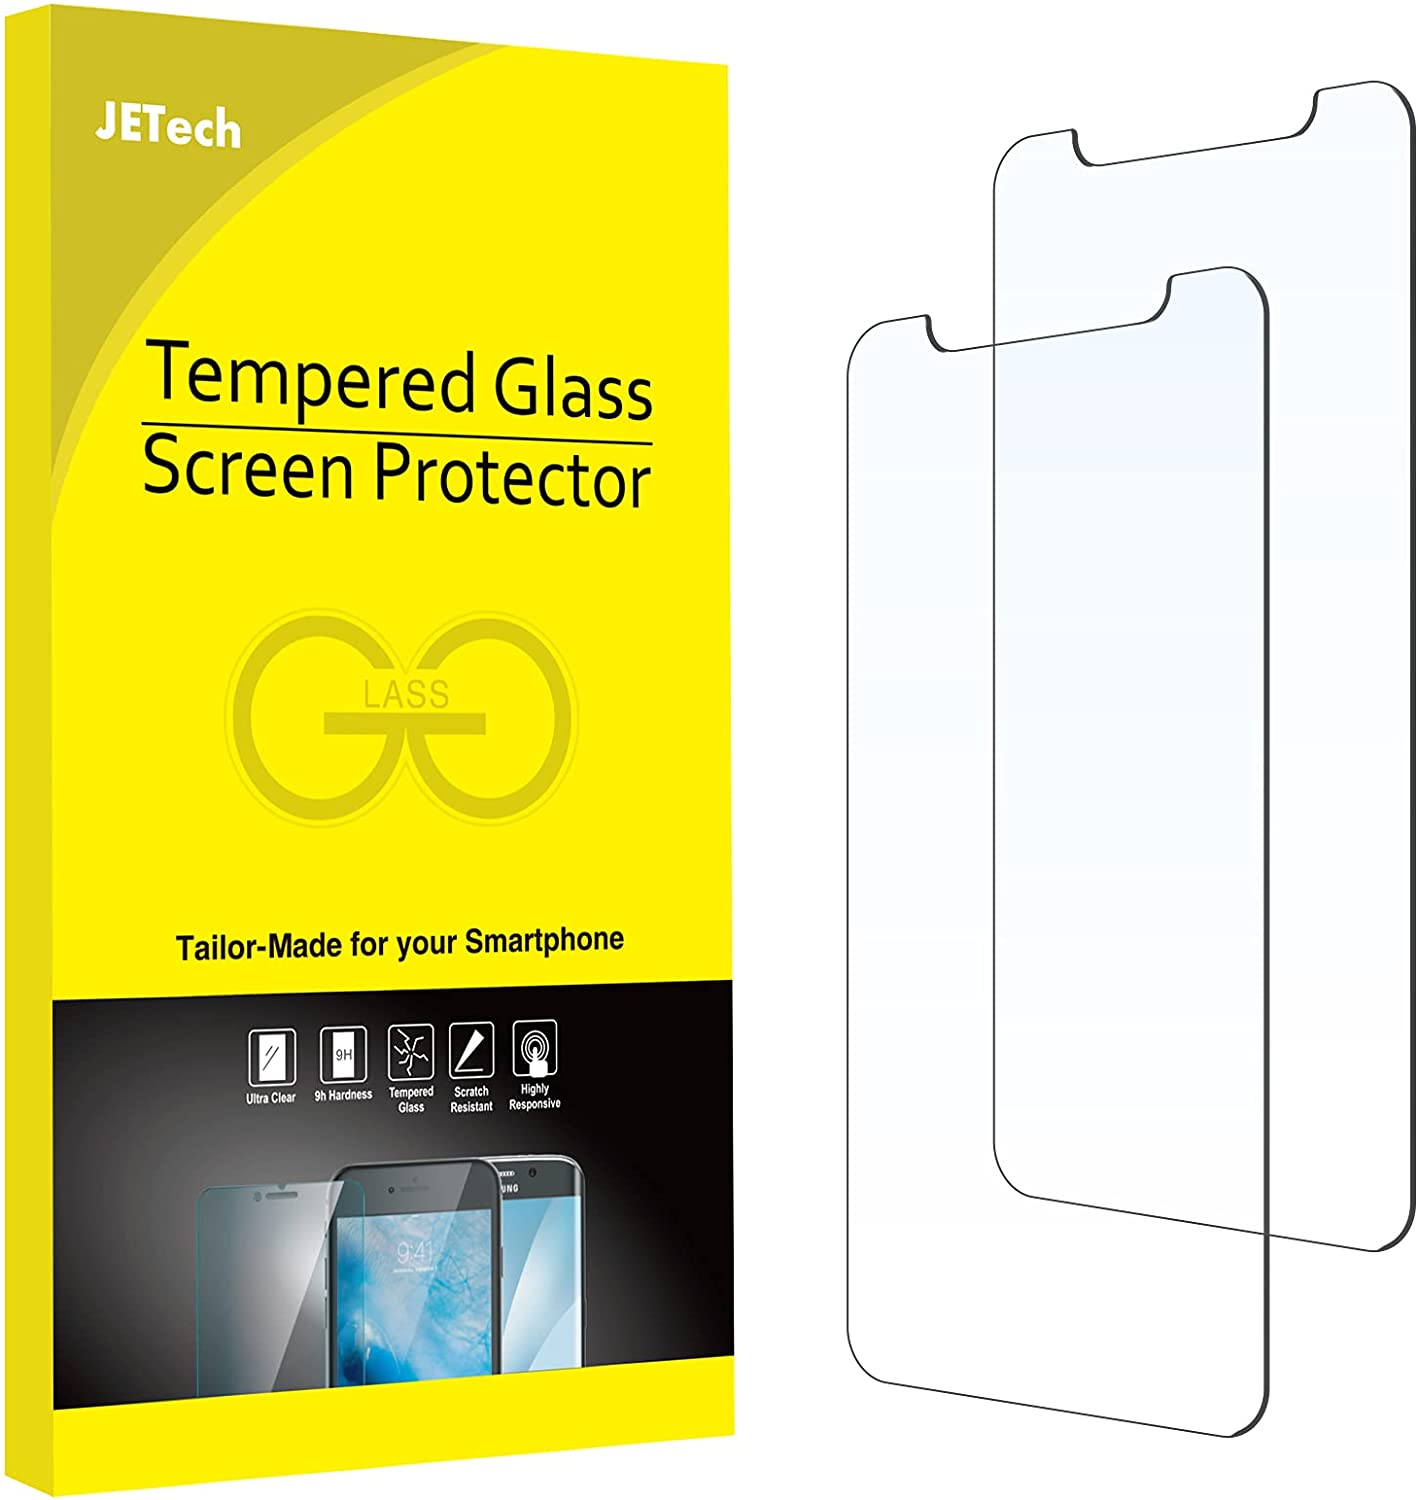 JETech Screen Protector for iPhone 11 Pro, iPhone Xs, iPhone X, 5.8-Inch, Tempered Glass Film, 2-Pack - e4cents